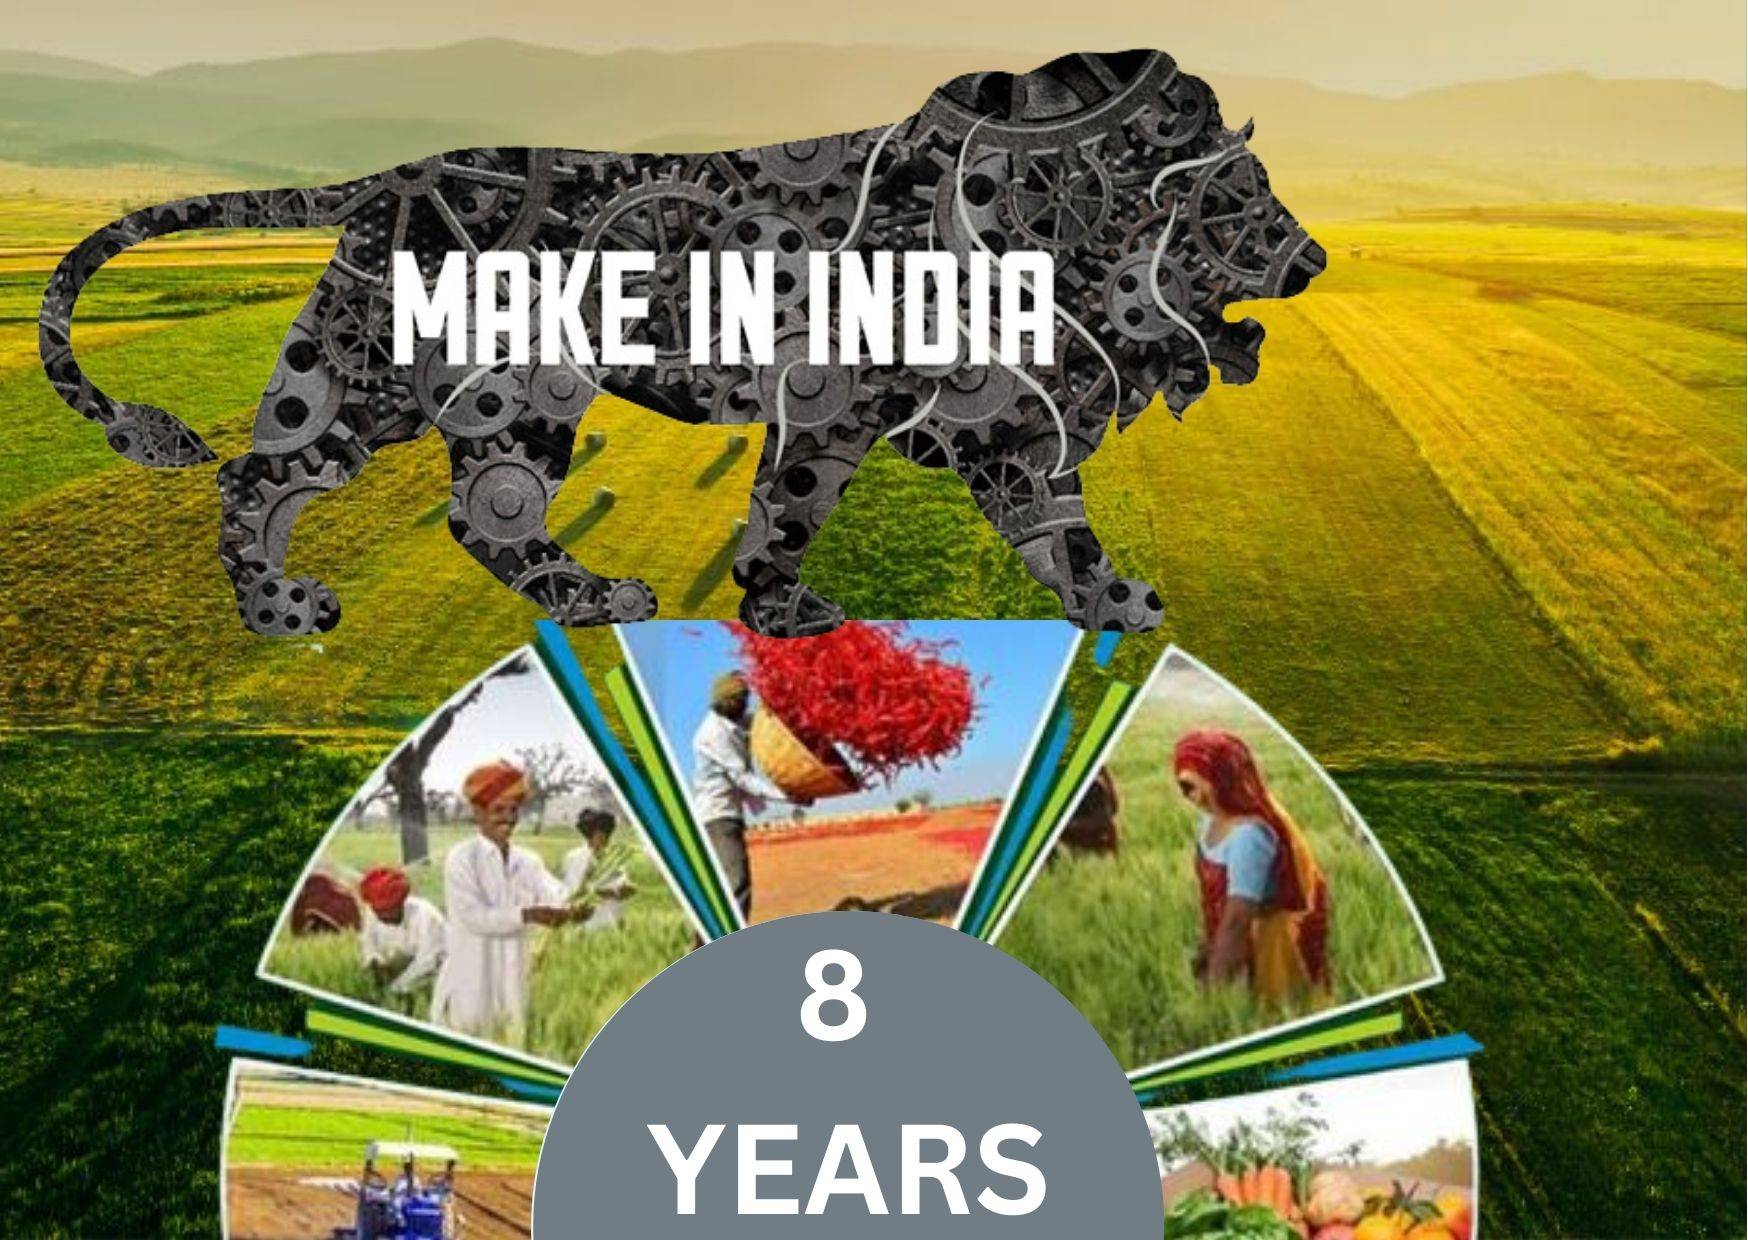 Make in India completes 8 years